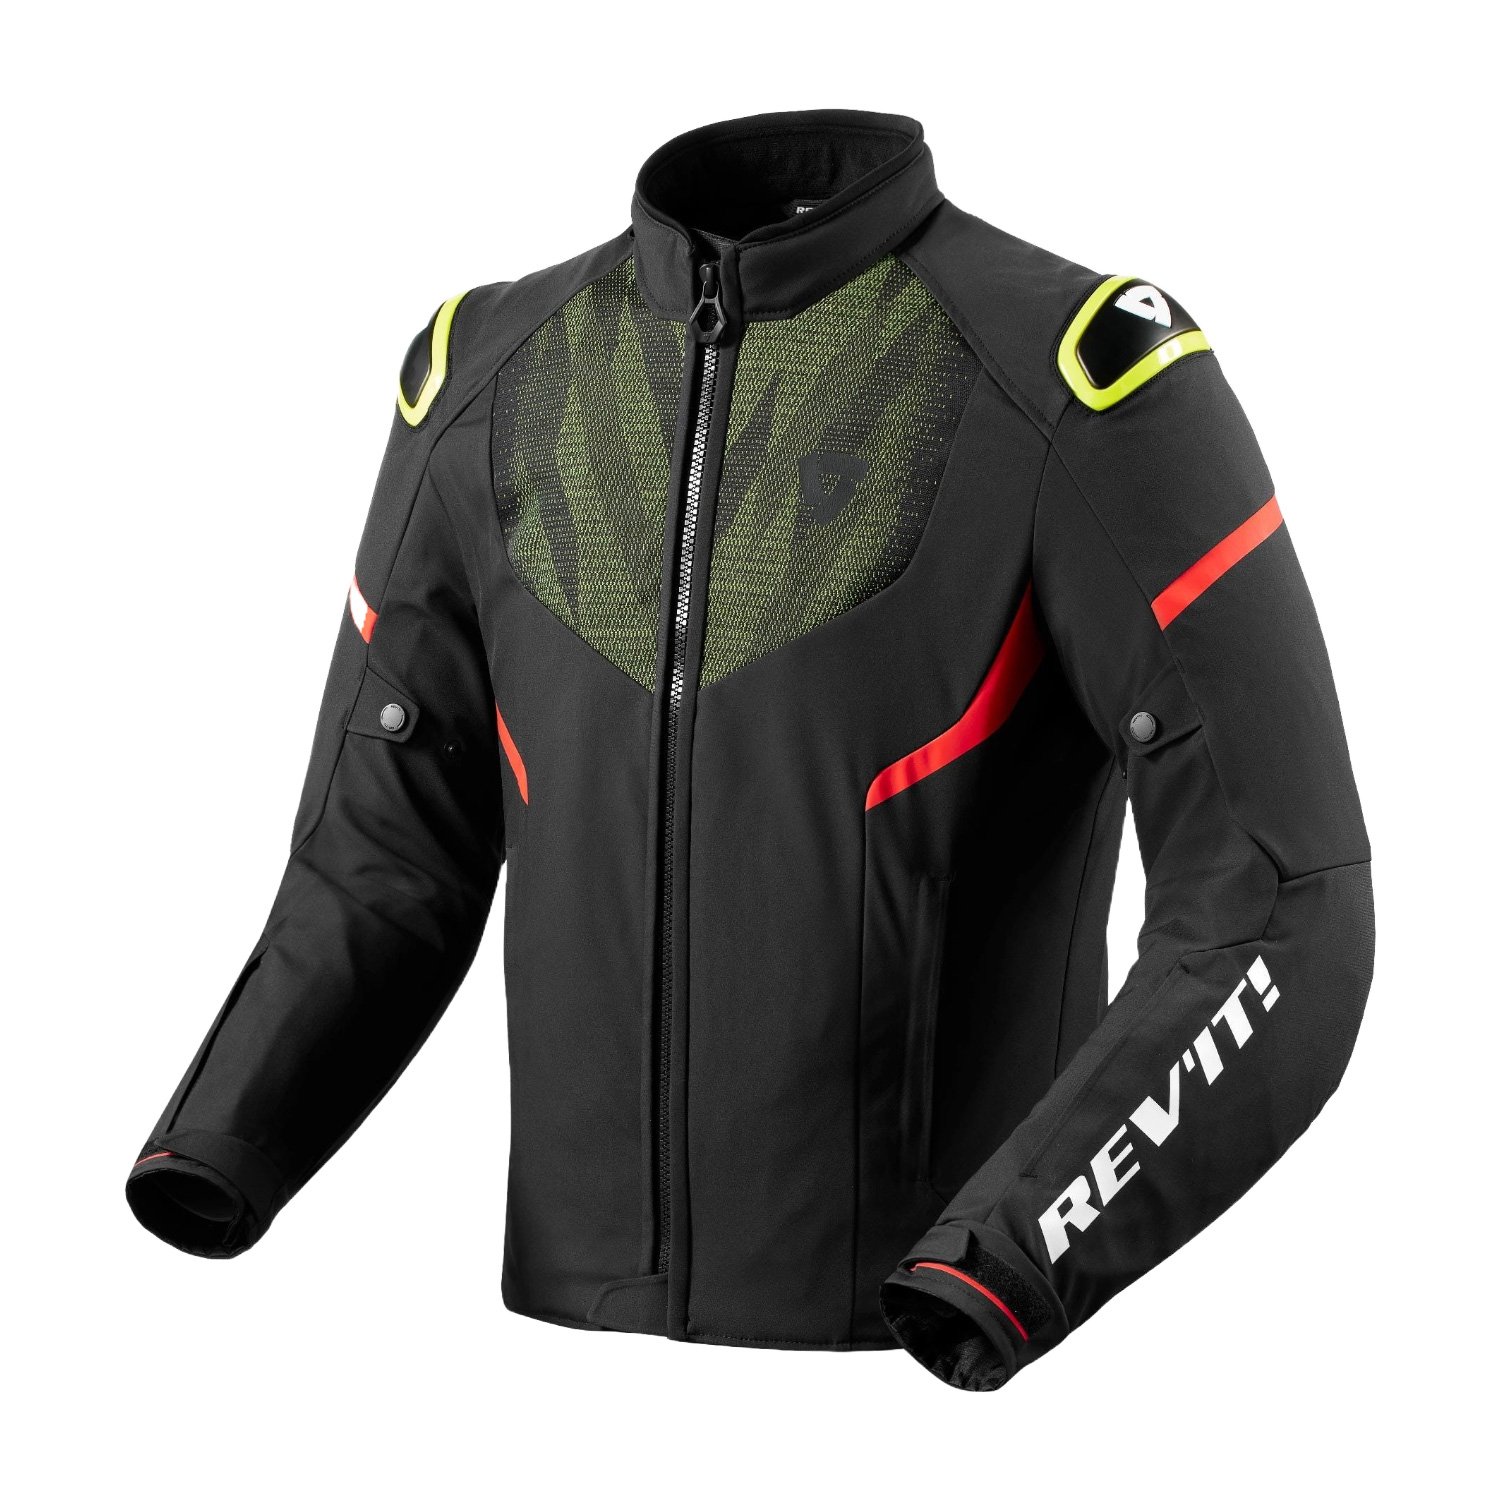 Image of REV'IT! Hyperspeed 2 H2O Jacket Black Neon Yellow Size S ID 8700001367349